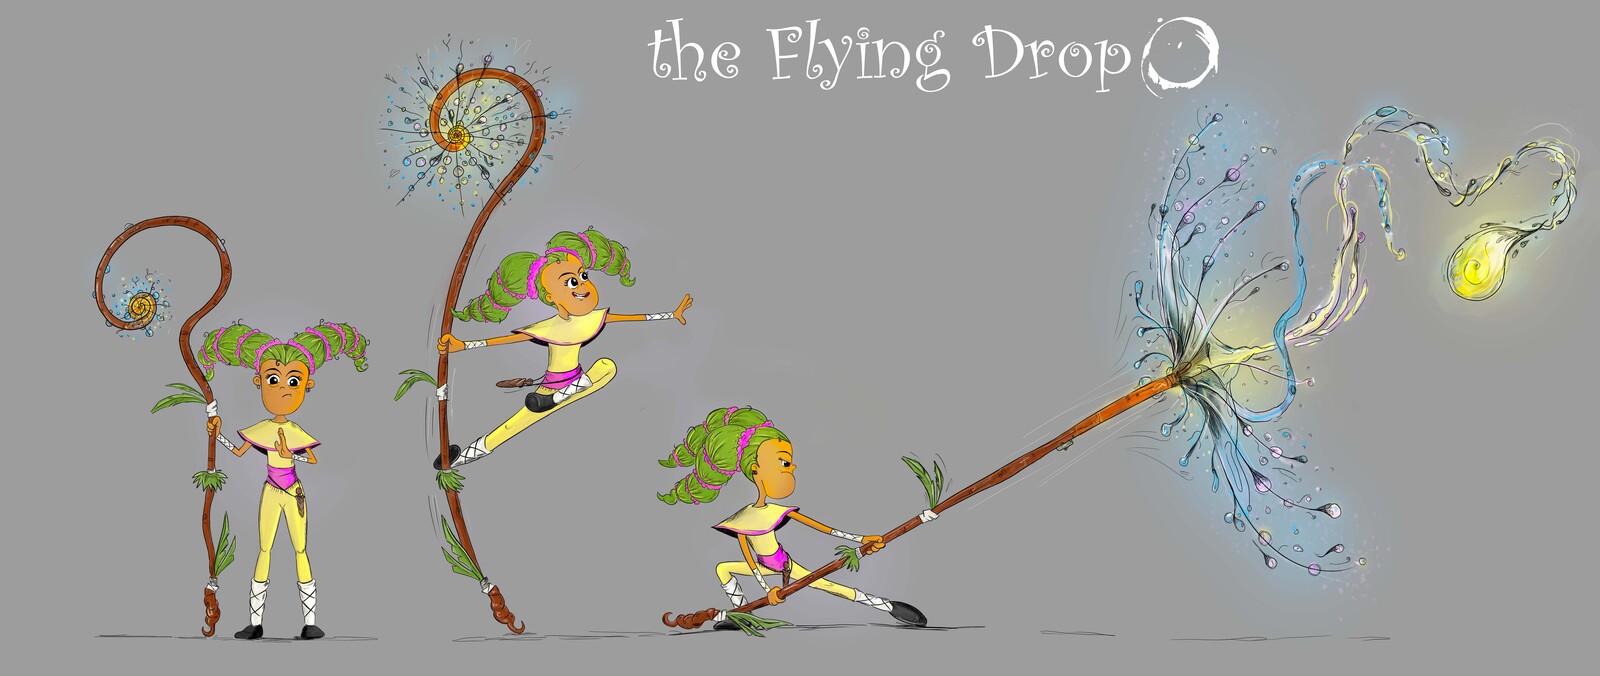 The Flying Drop